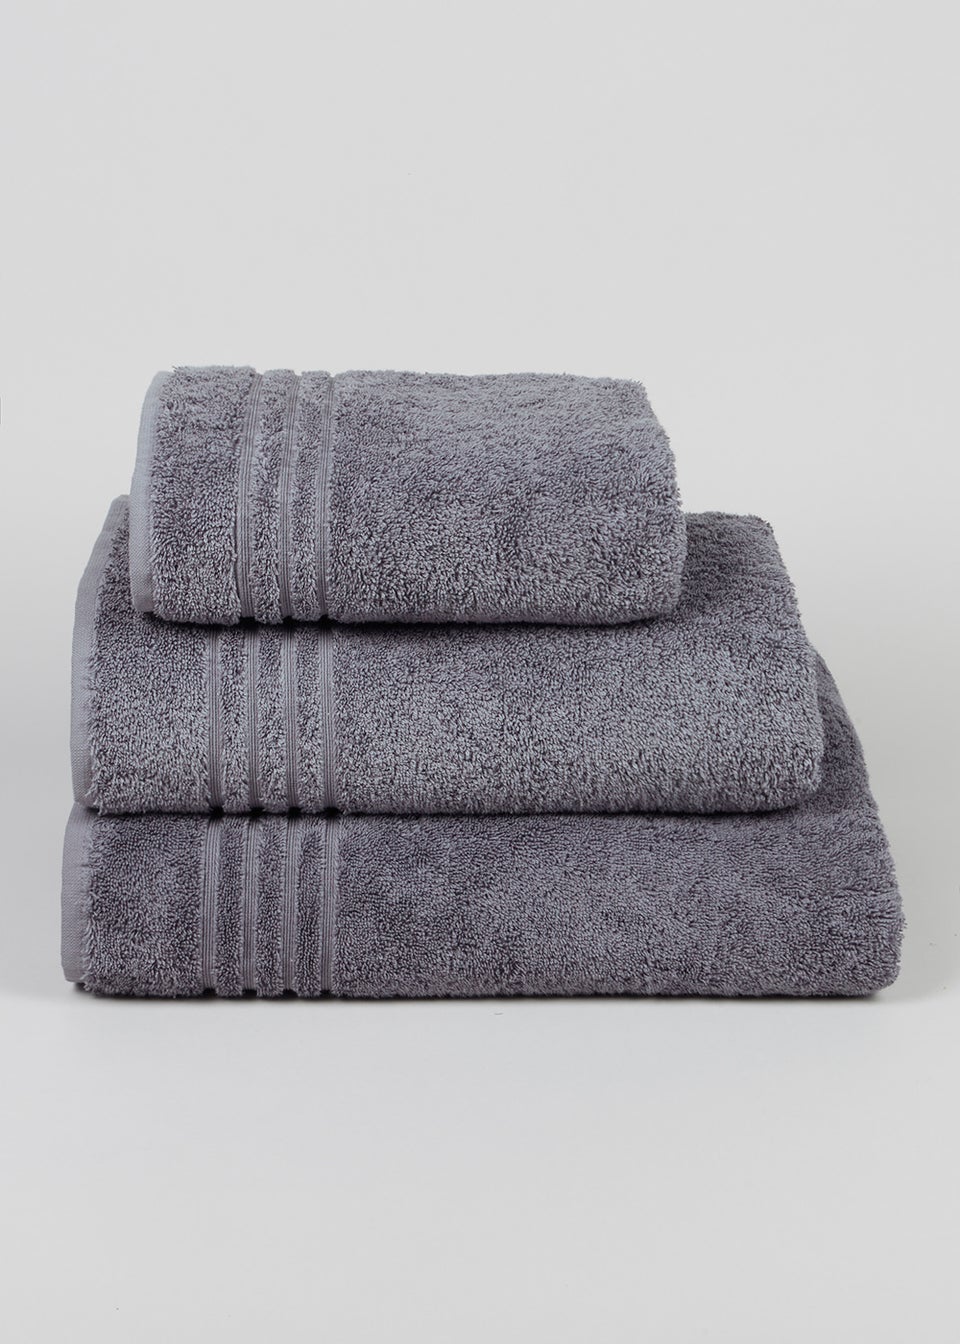 Egyptian Cotton Towels (700gsm)